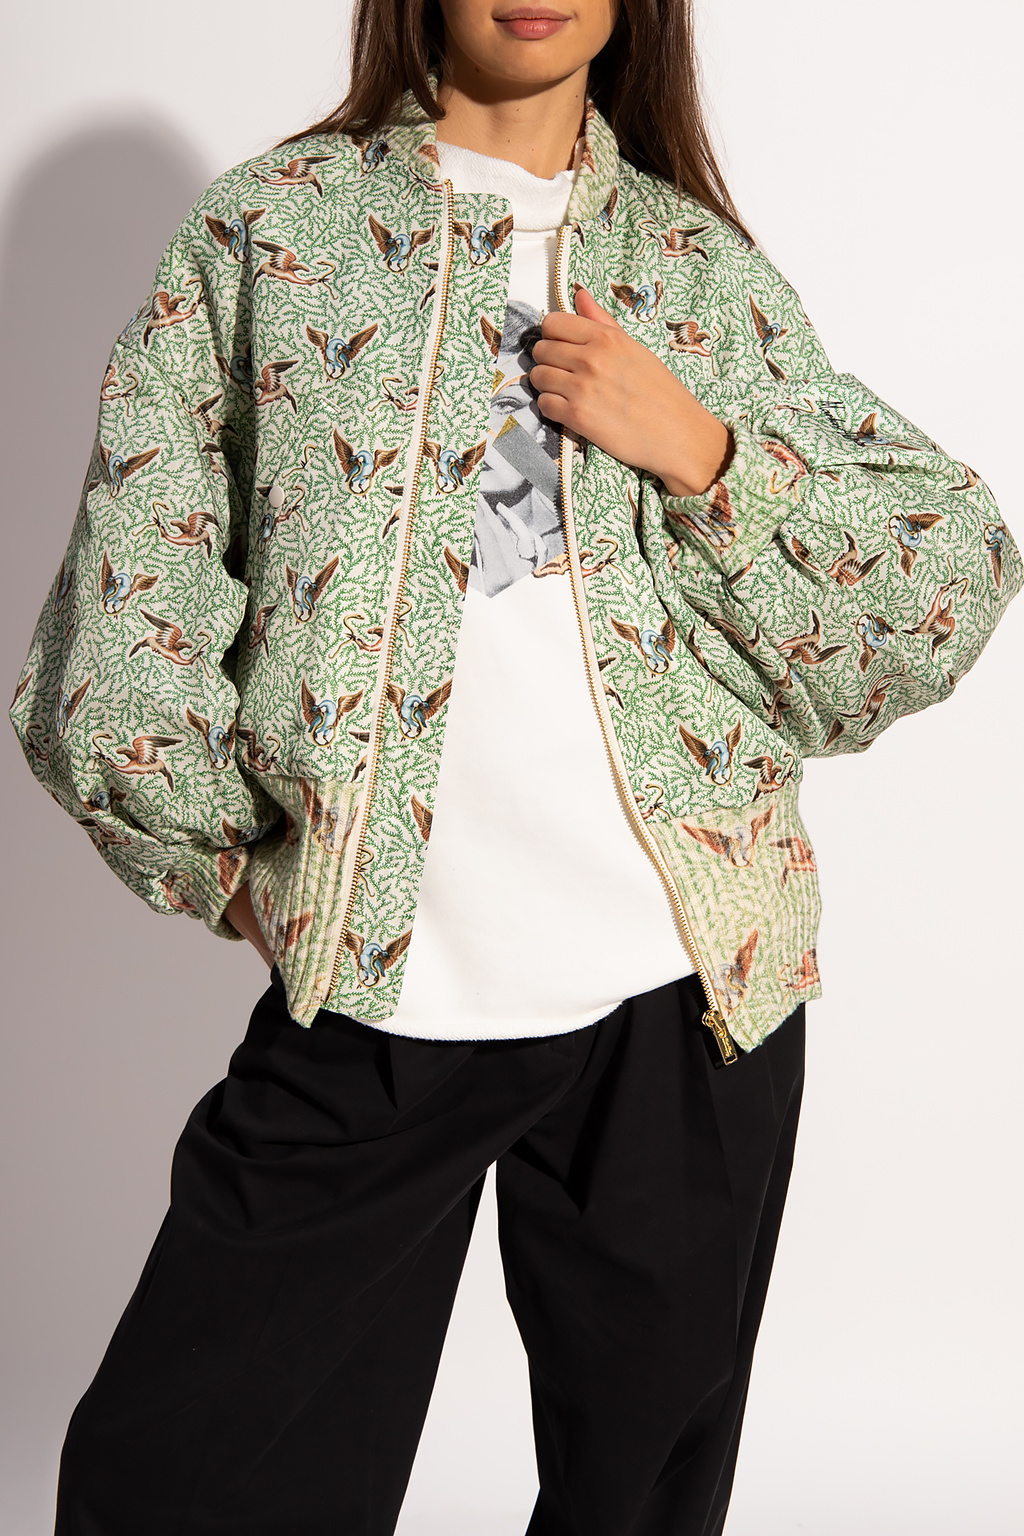 Undercover Patterned jacket